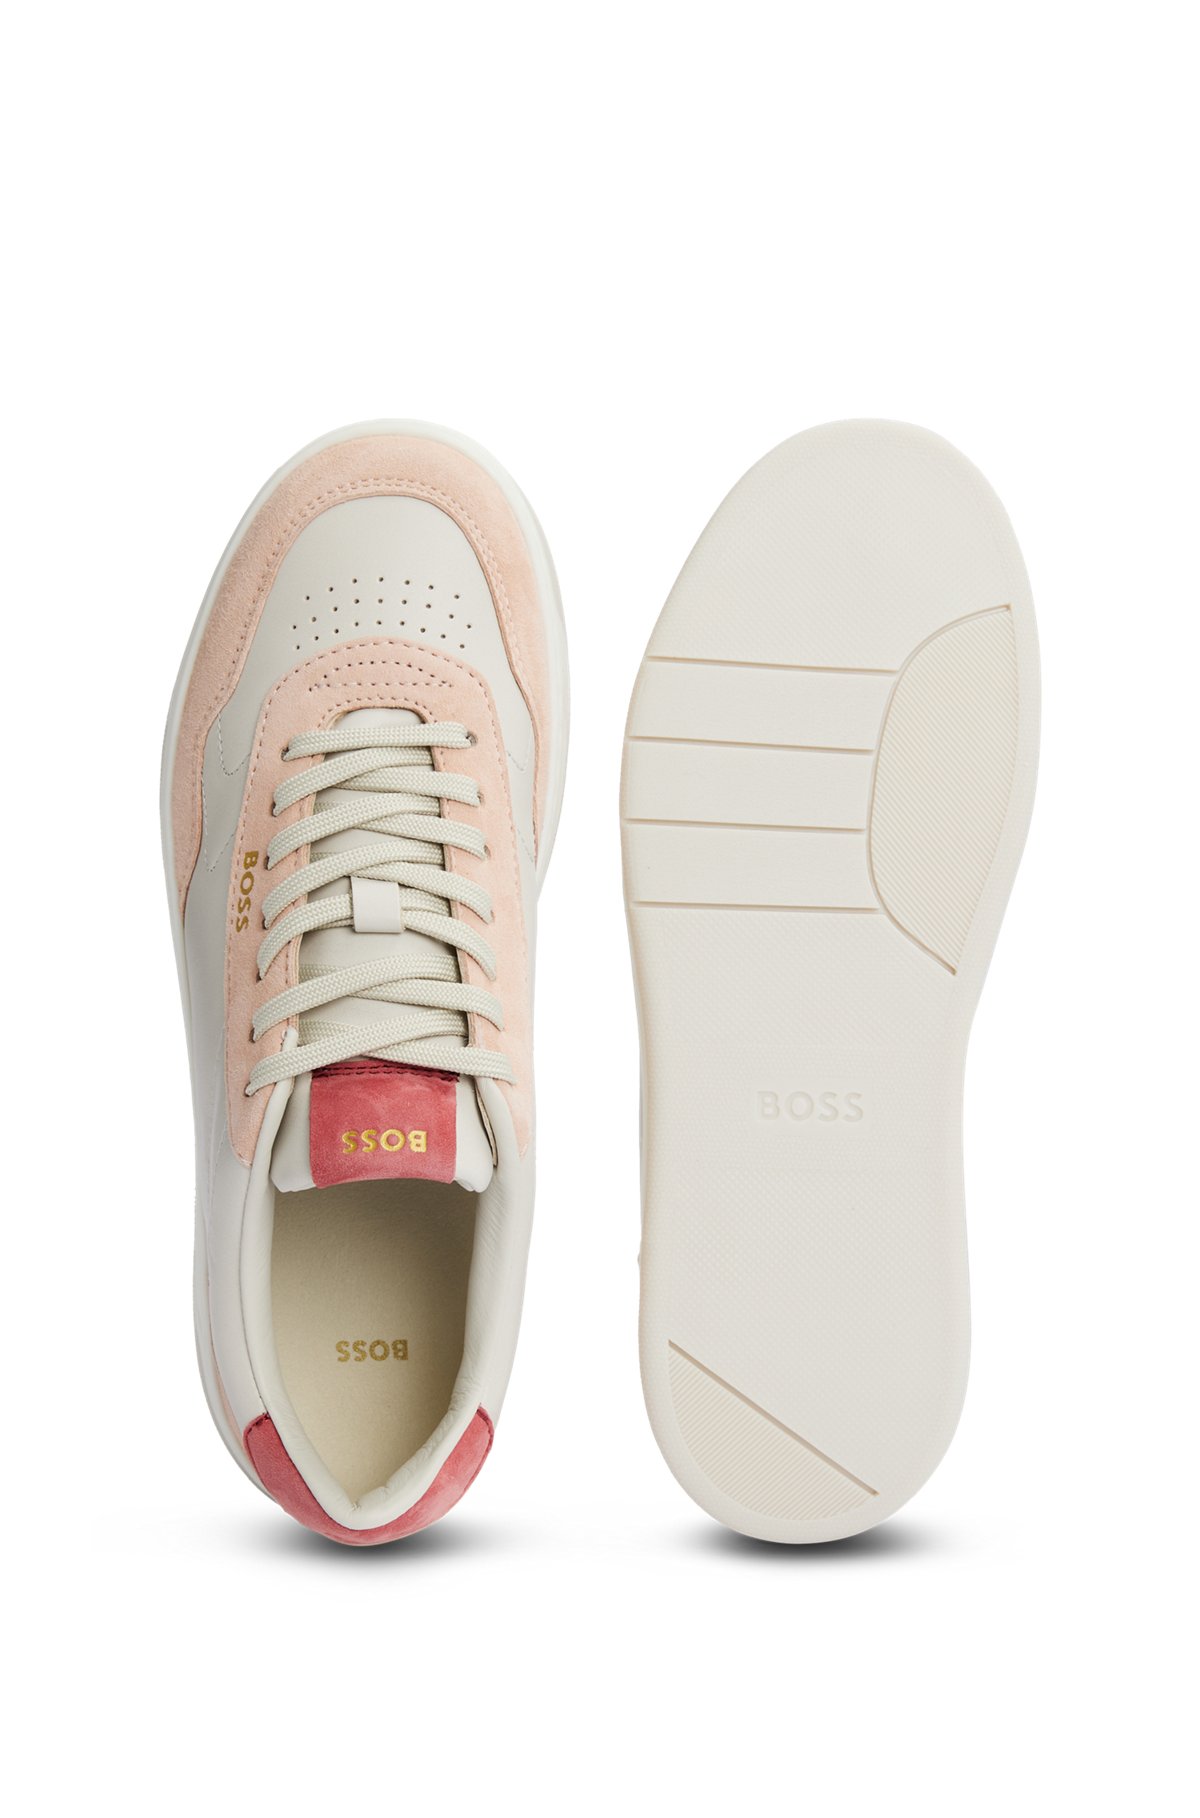 Branded lace-up trainers in leather and nubuck, White